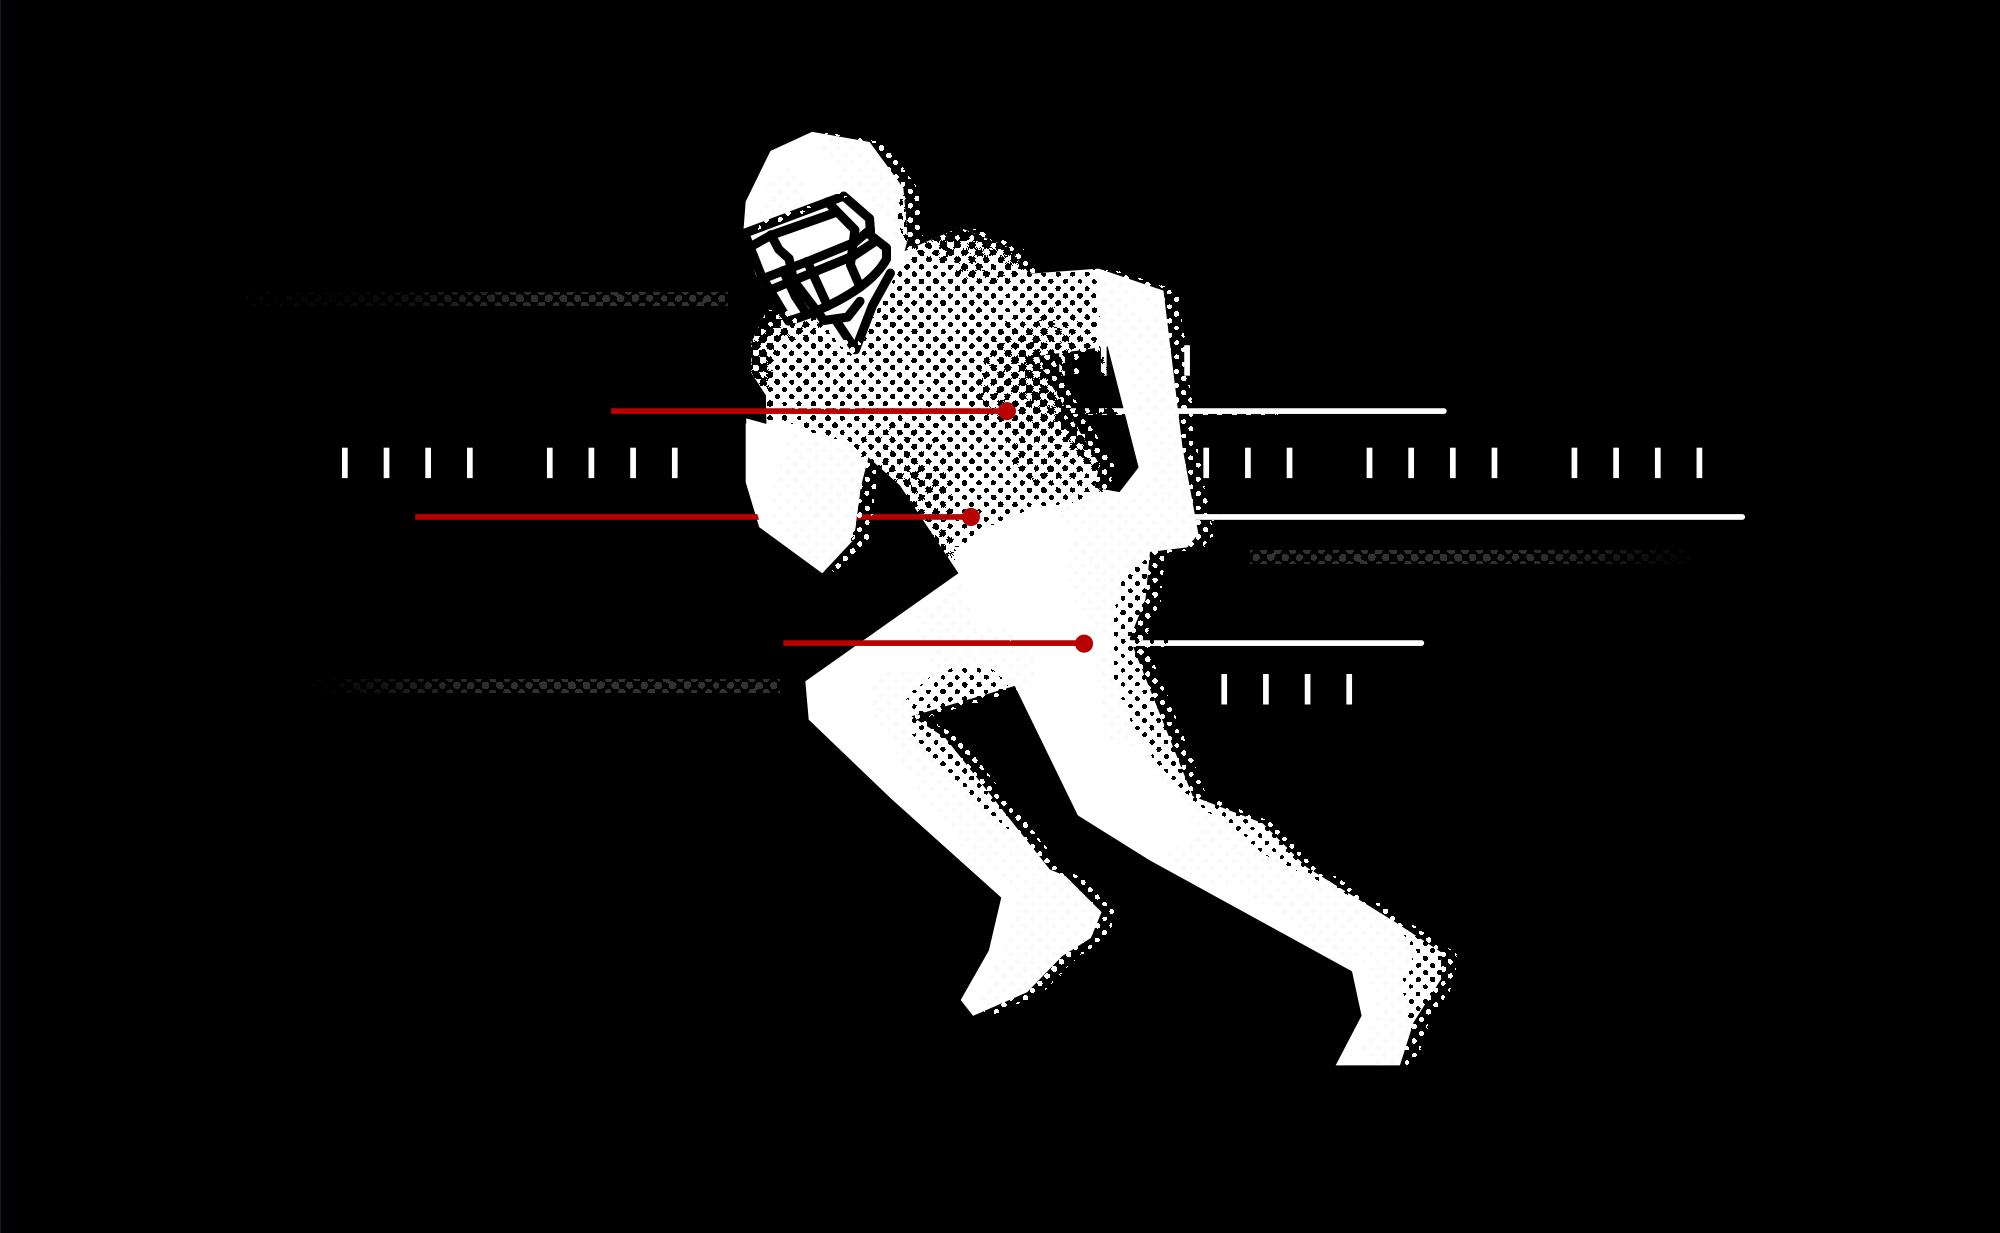 Illustration showing a football player running. Lines pass through their body insinuating bullet trails.